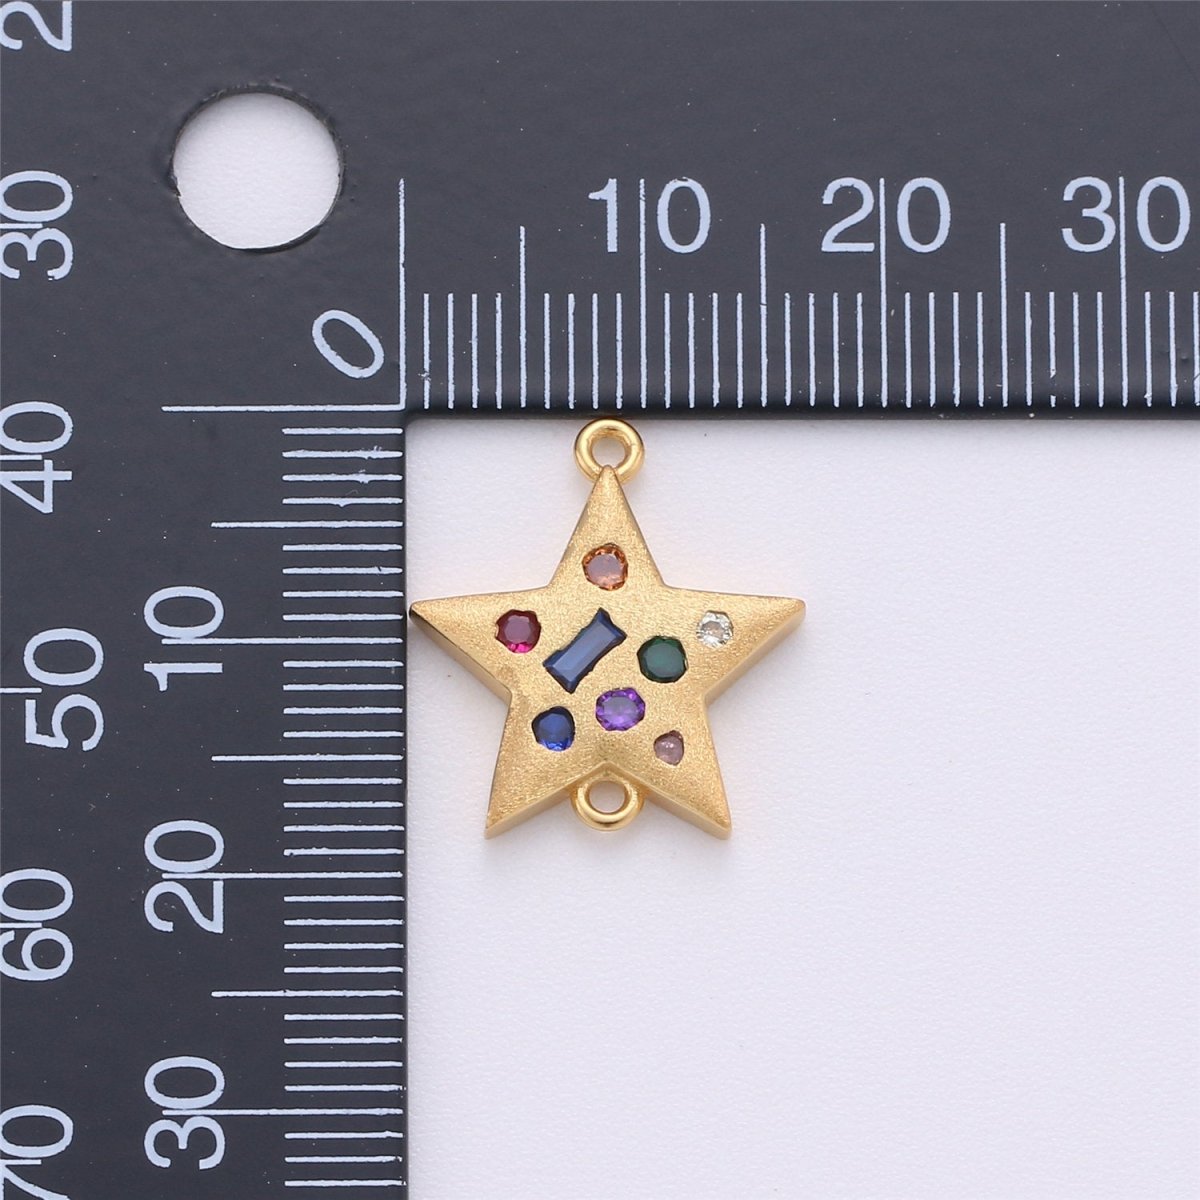 Dainty 18K Star Connector Charm, Gold Filled Star Bracelet Connector, Multi-Color CZ Stone, 20mmx14mm For Layer Necklace Earring Bracelet F-209 - DLUXCA